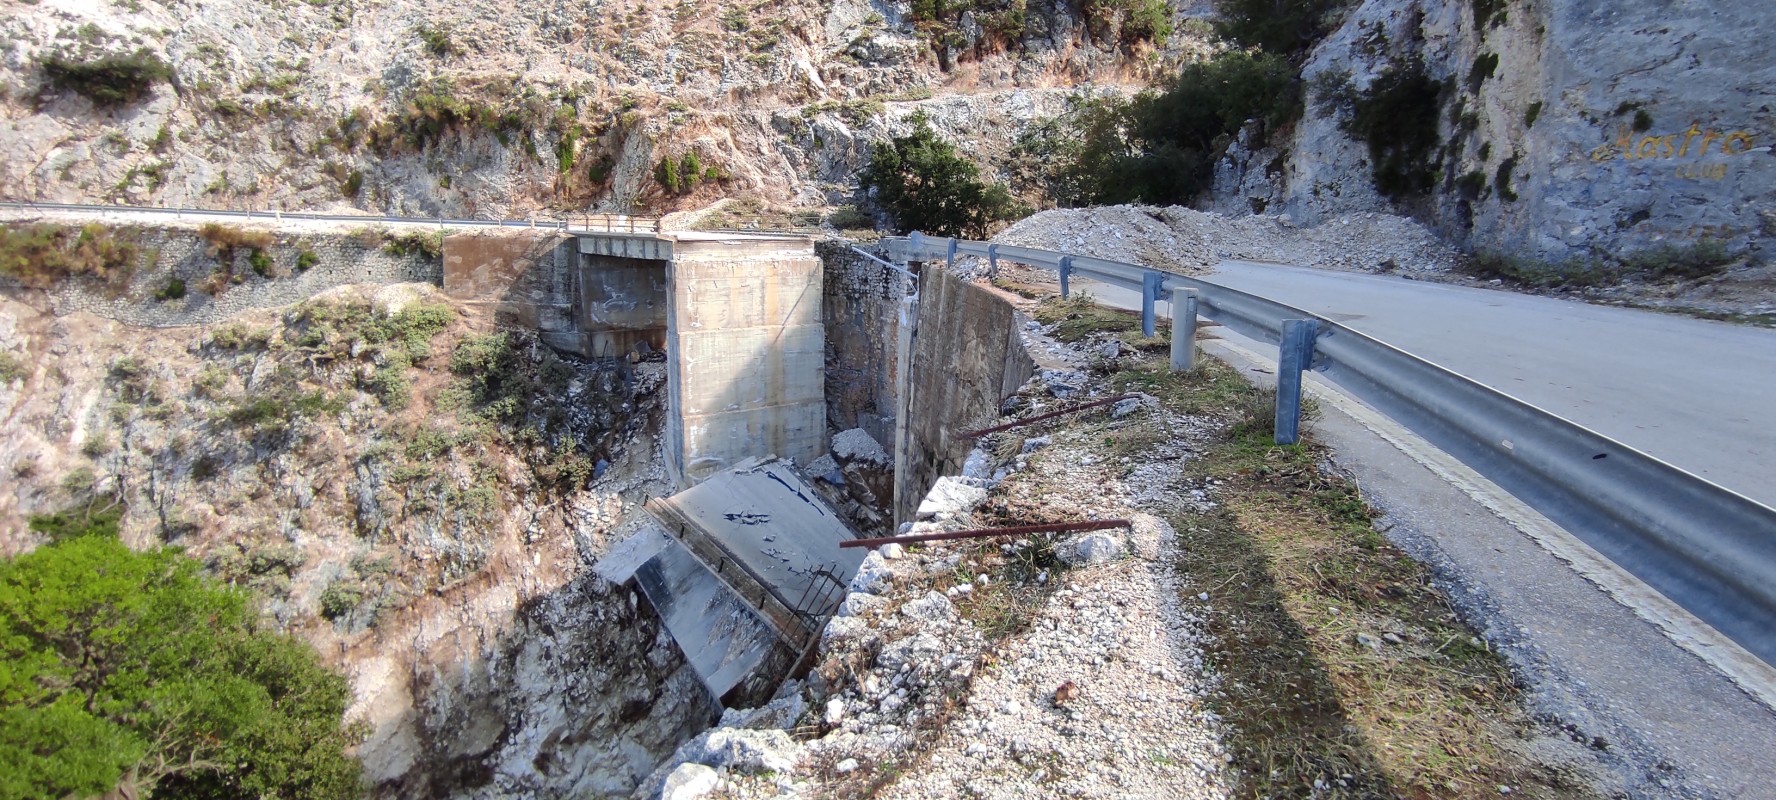 Zekkos Leads GEER Mission for Medicane Ianos. Released Report documents thousands of landslides, bridge collapses and infrastructure damagel